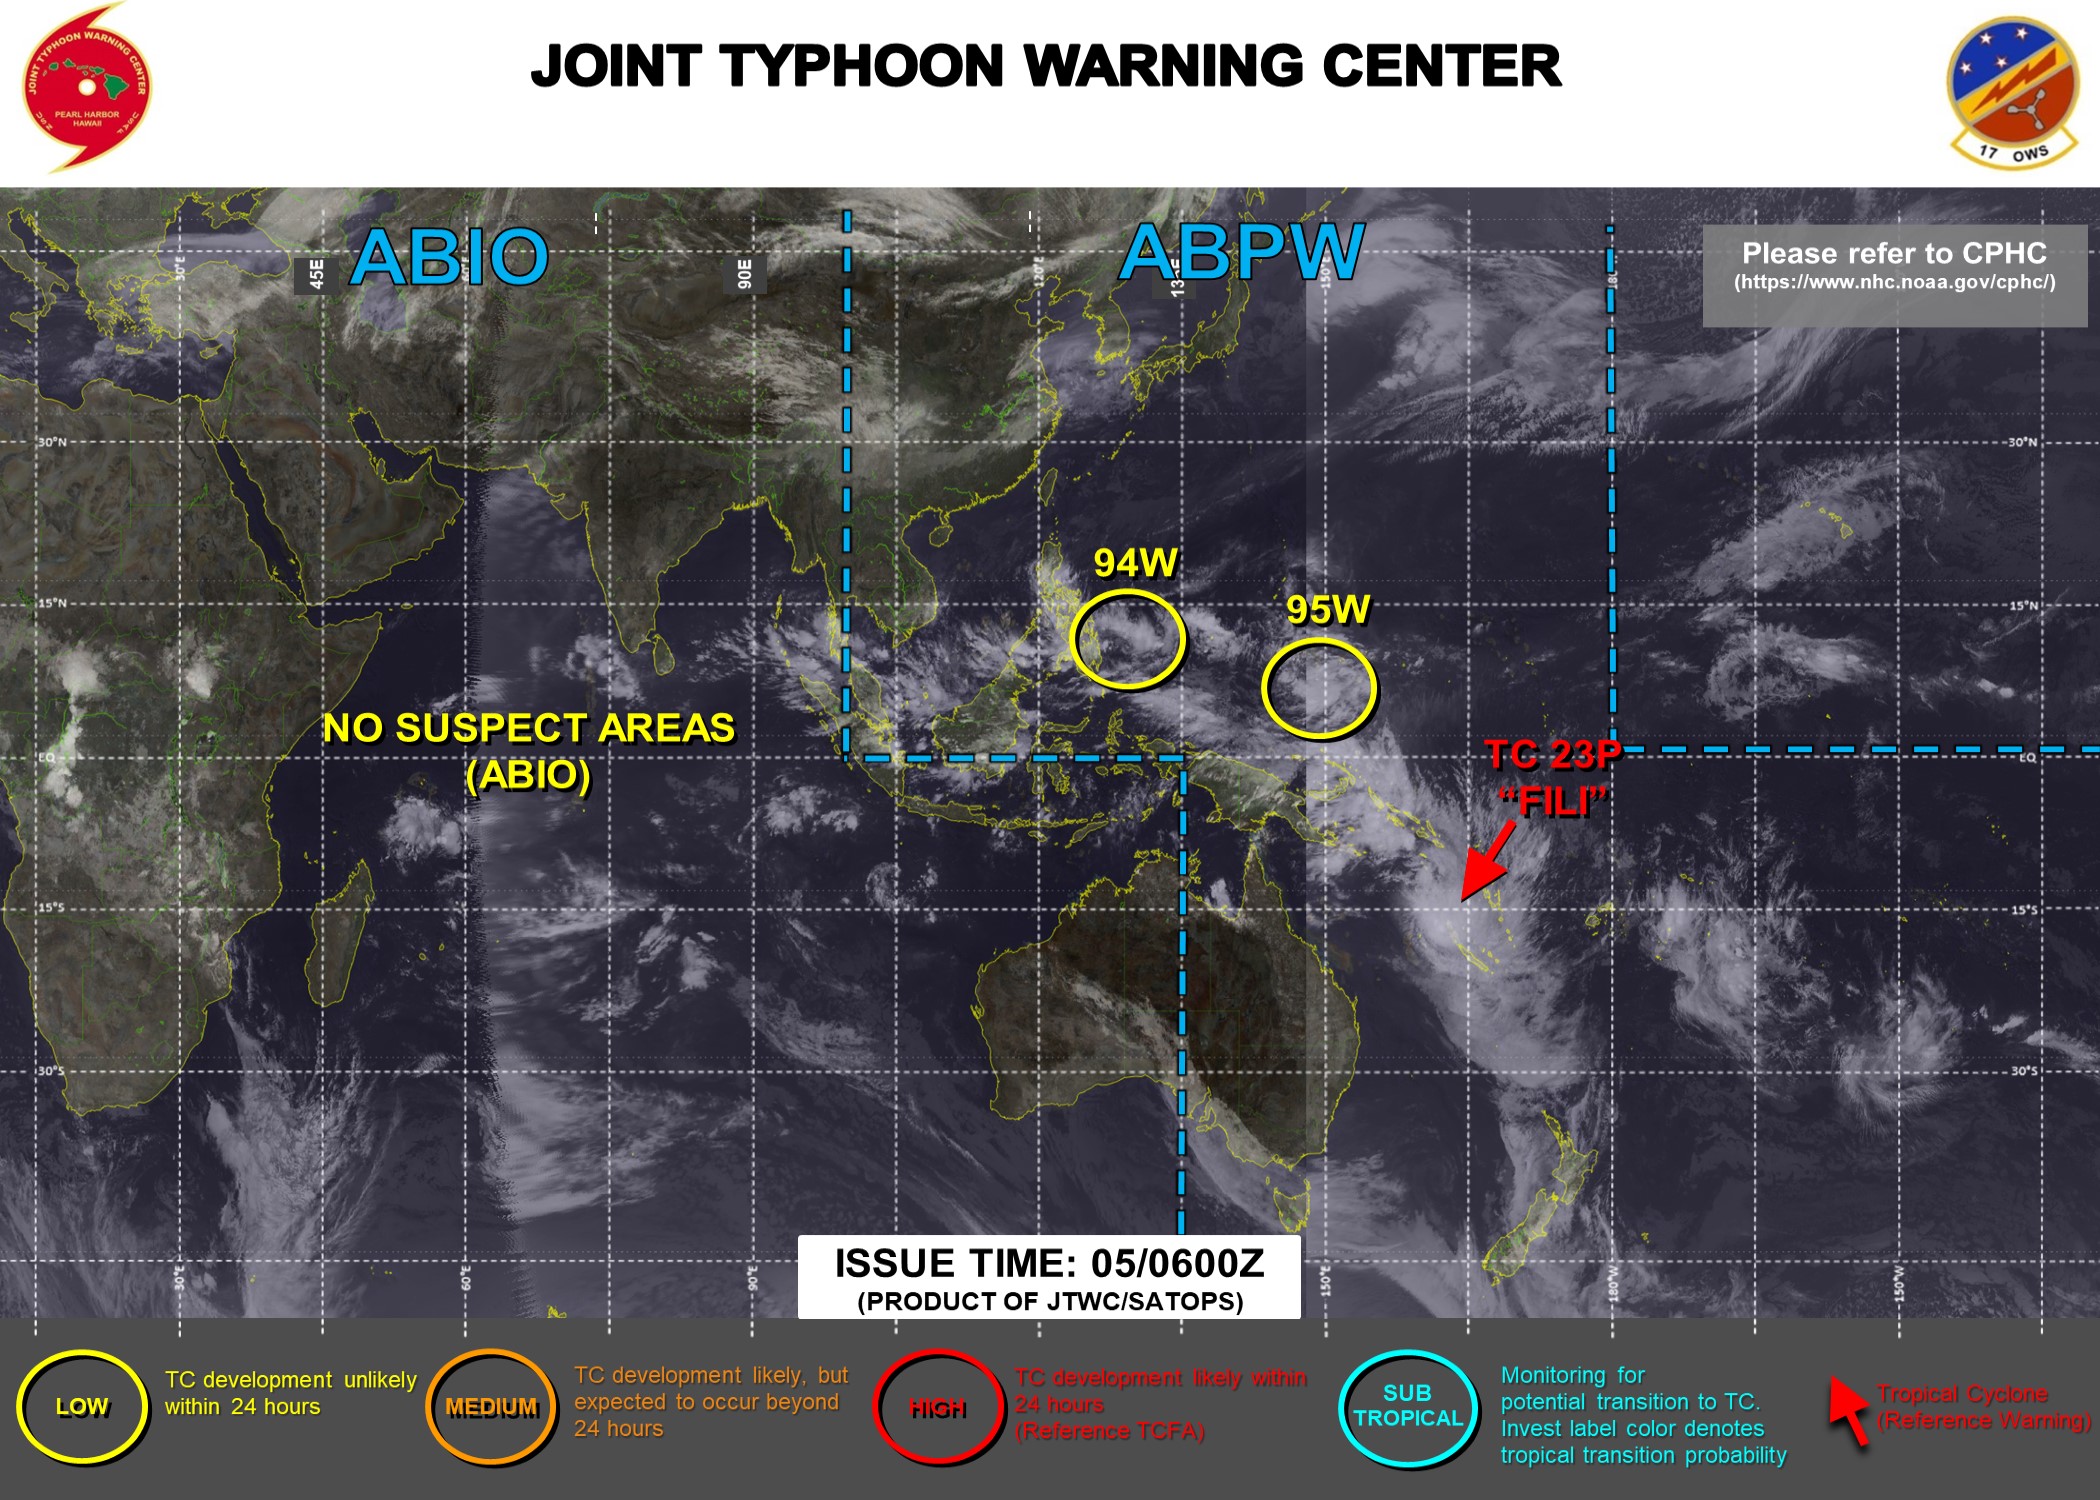 JTWC IS ISSUING 6HOURLY WARNINGS AND 3HOURLY SATELLITE BULLETINS ON TC 23P(FILI).